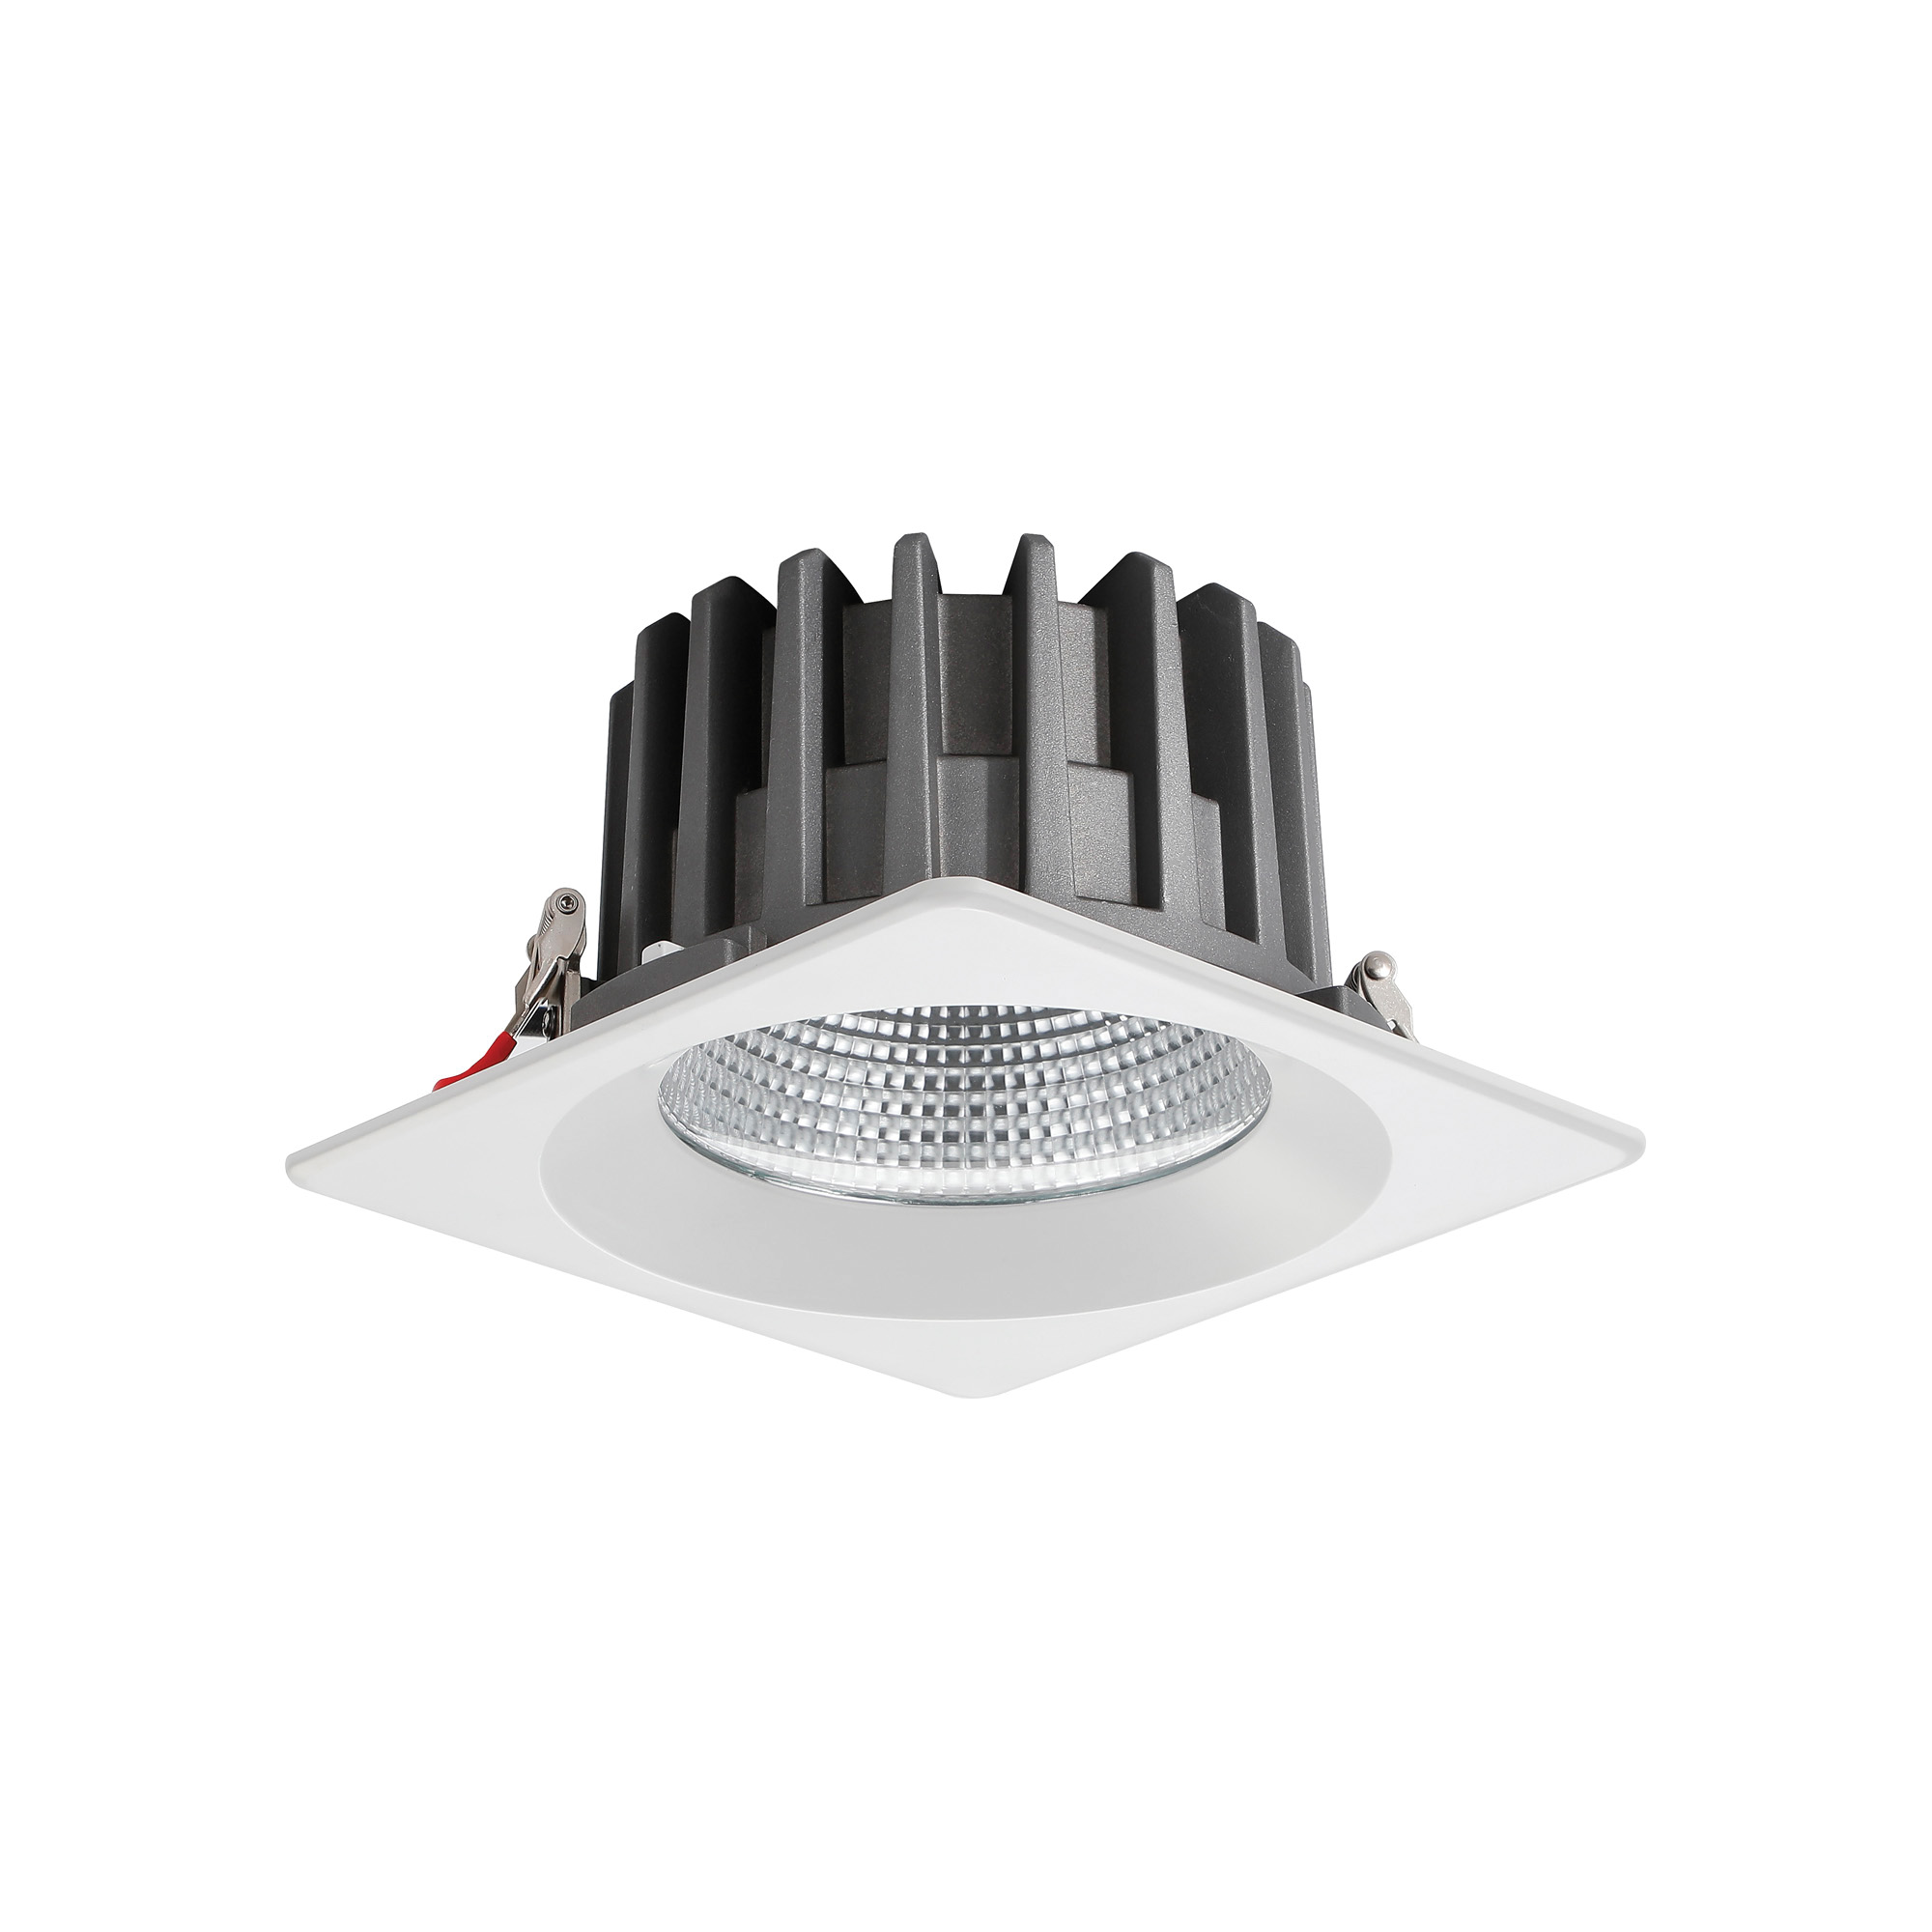 DL200080  Bionic 40; 40W; 1000mA; White Deep Square Recessed Downlight; 3540lm ;Cut Out 175mm; 40° ; 4000K; IP44; DRIVER INC.; 5yrs Warranty.